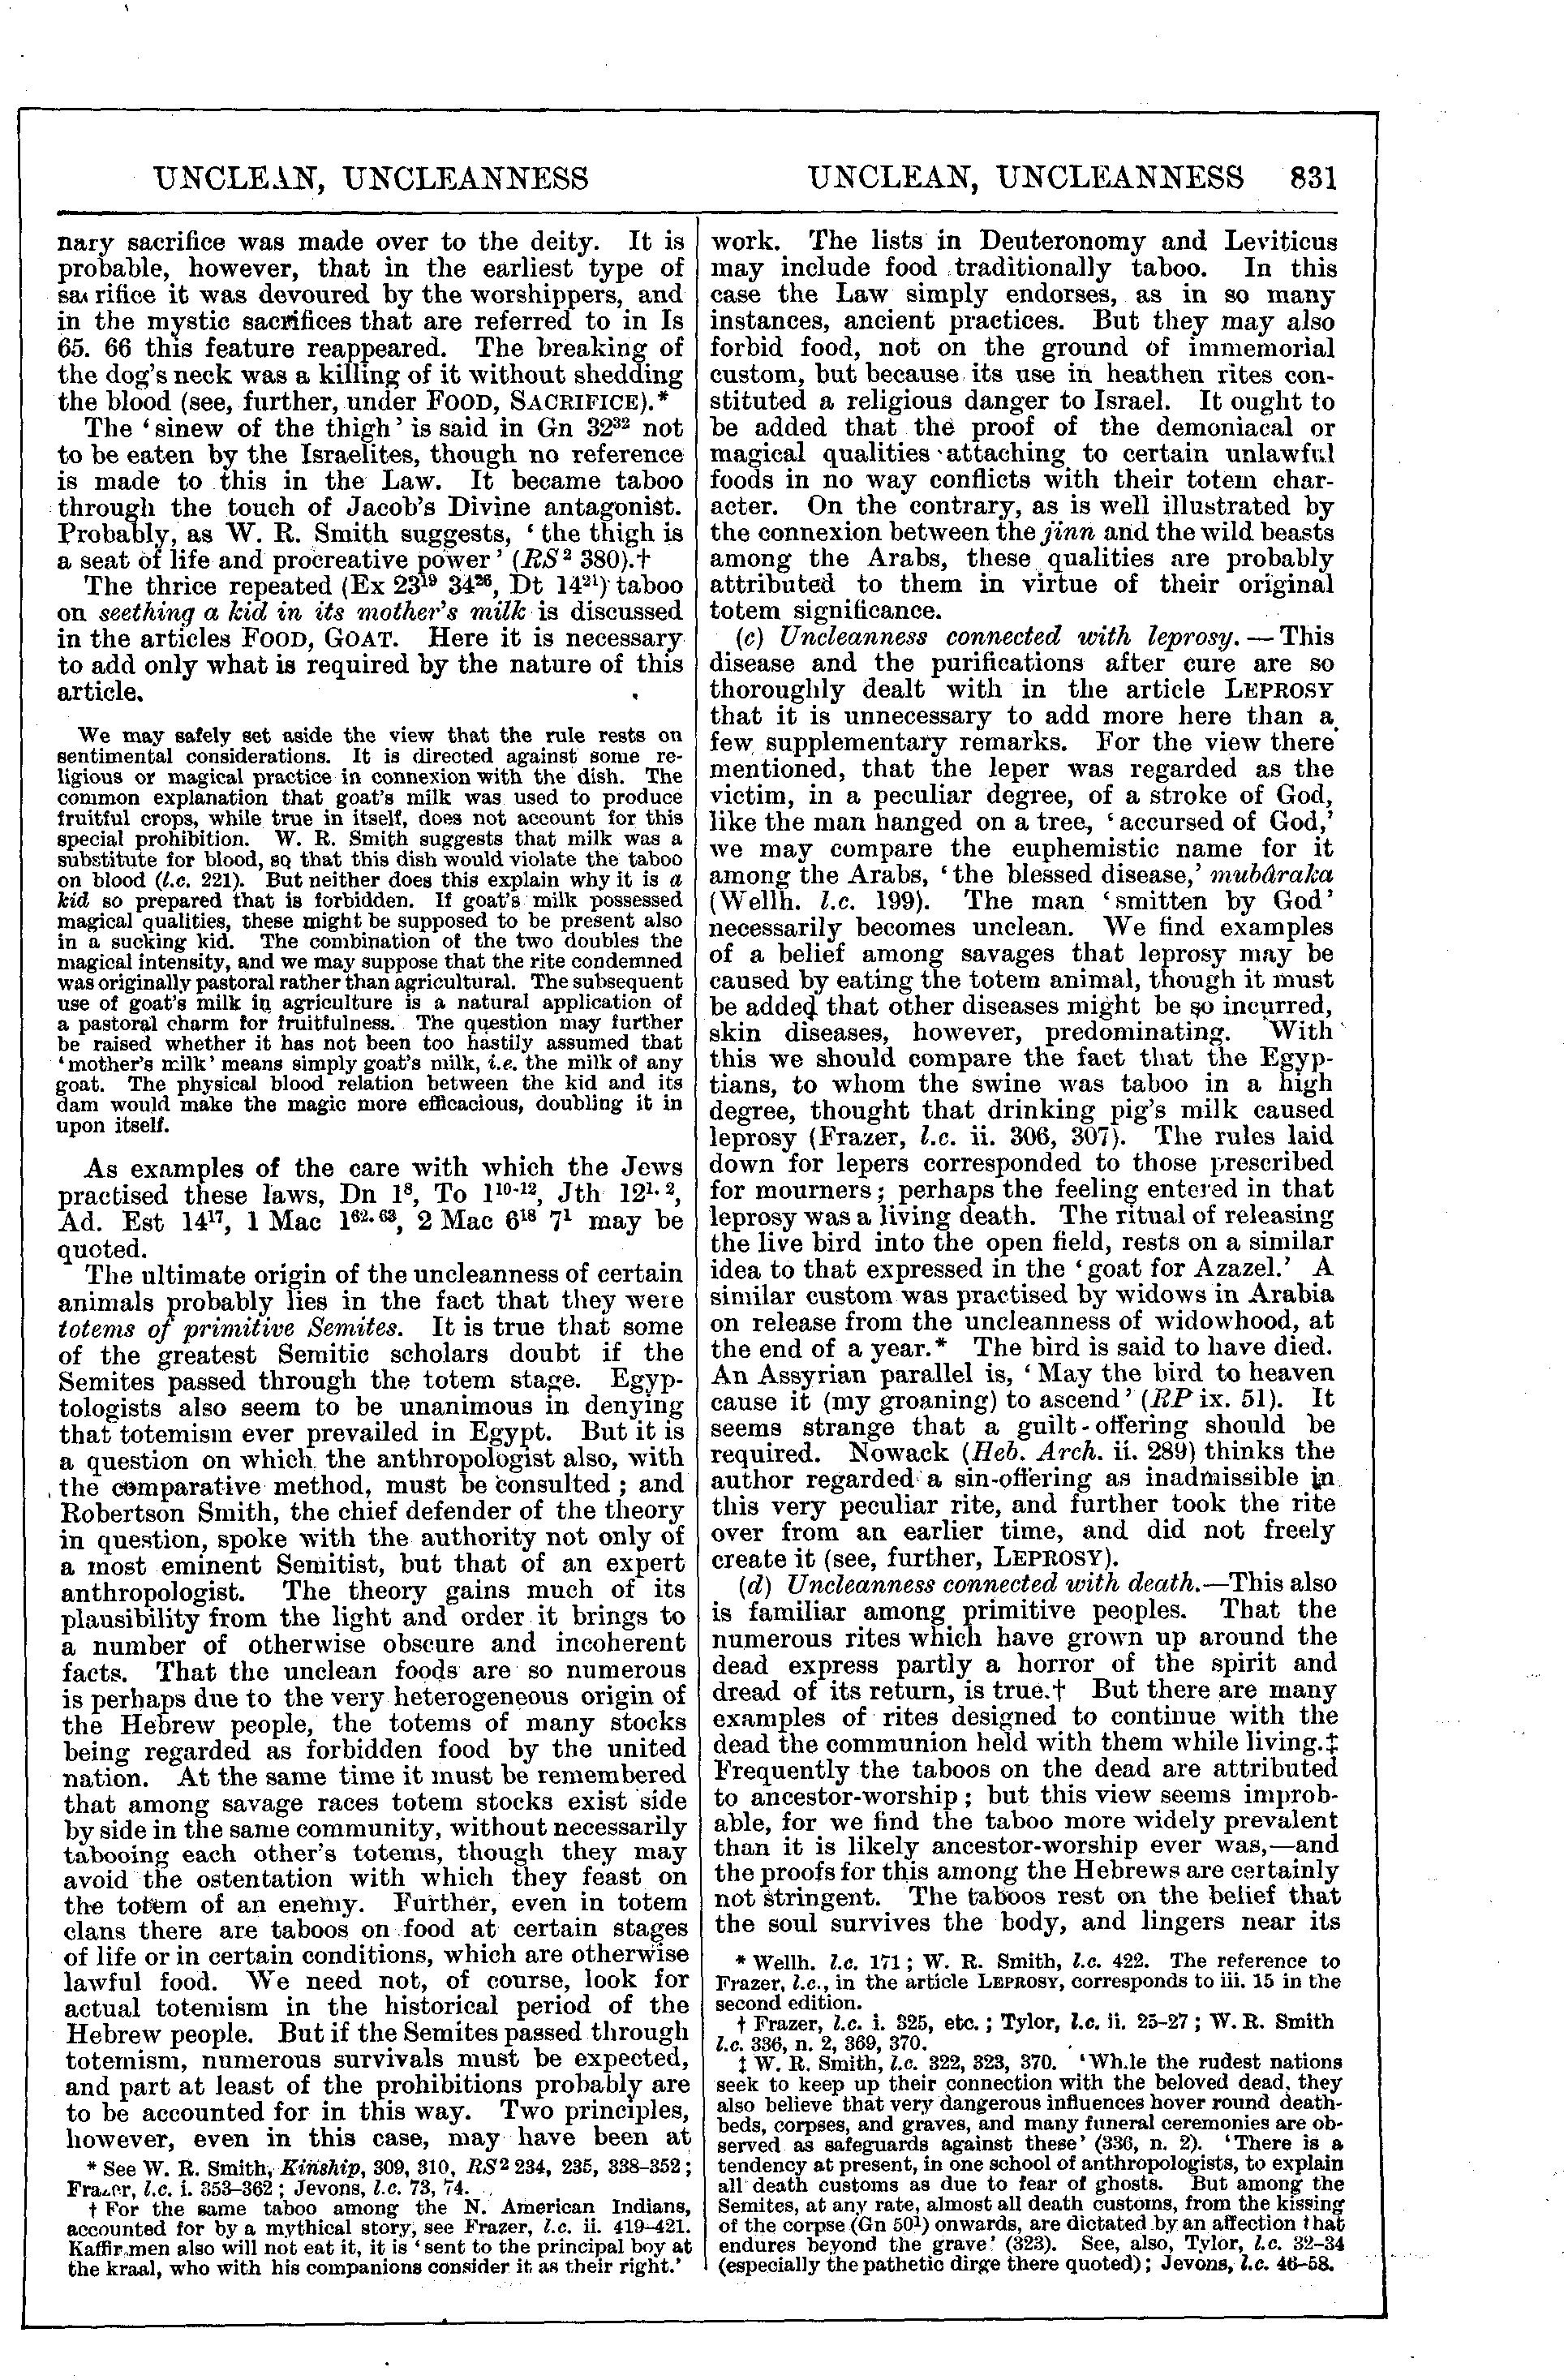 Image of page 831